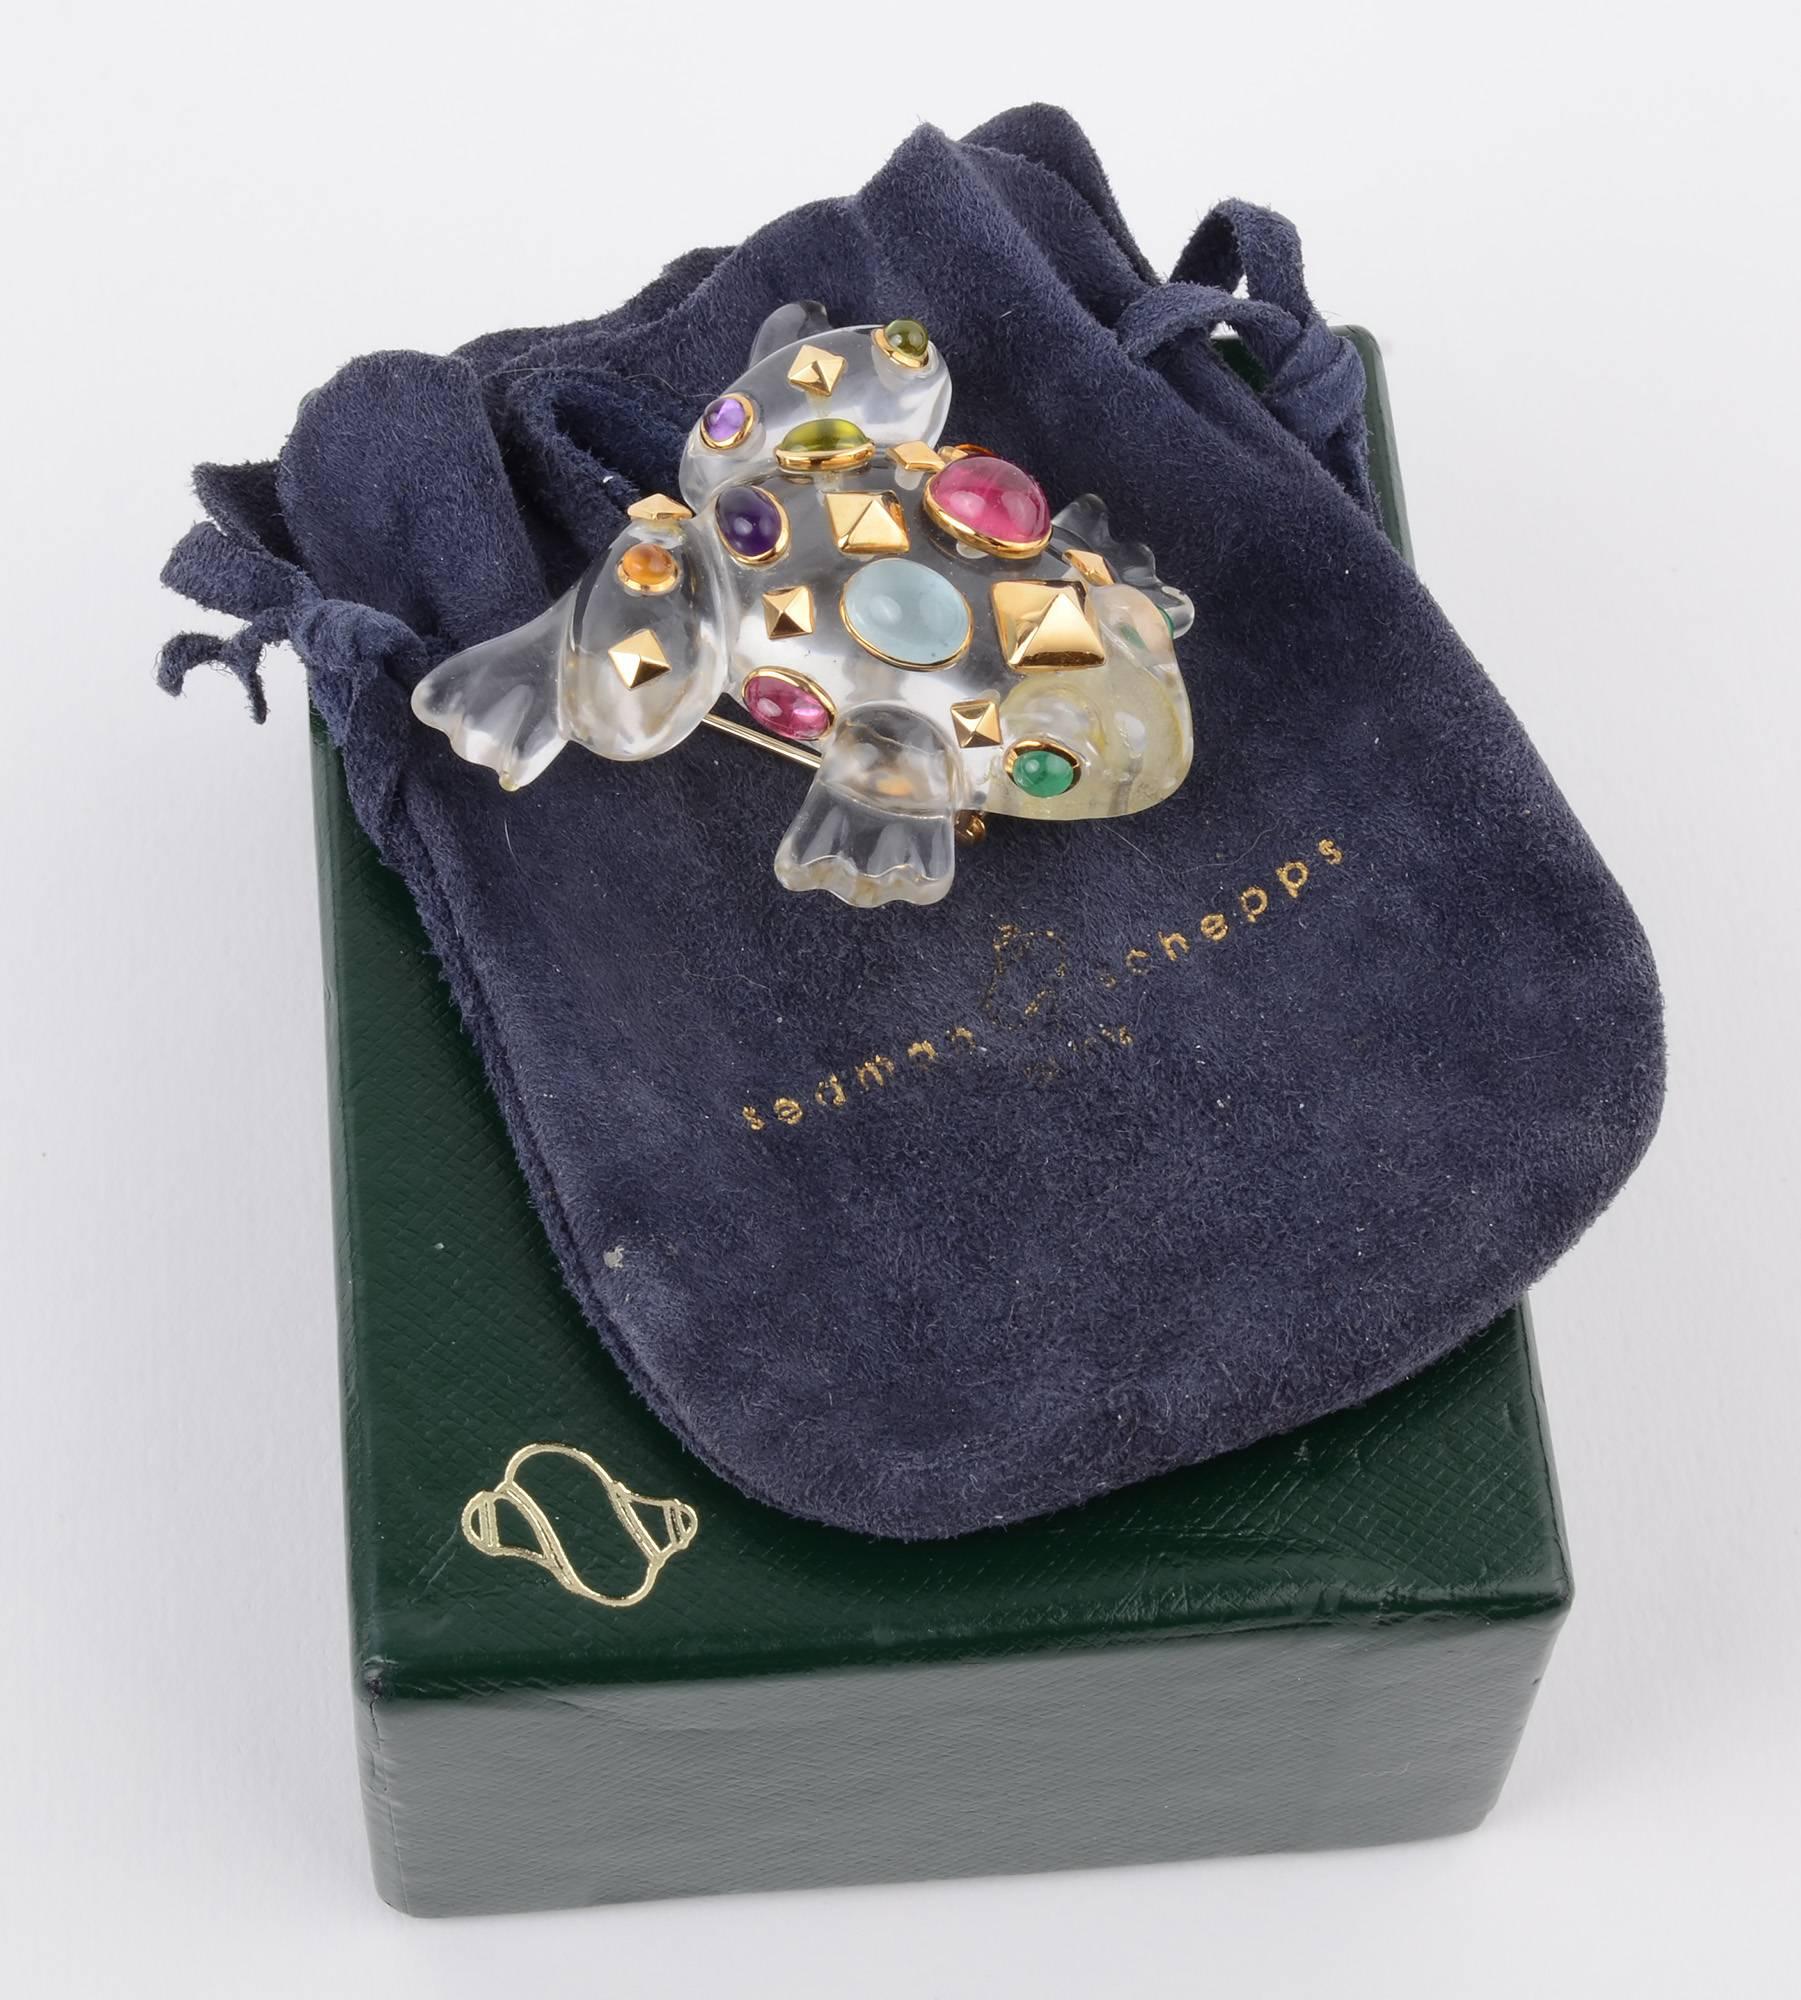 Fabulous Seaman Schepps Frog Brooch, one of their iconic pieces. This fine example has a crystal body  with emerald eyes and encrusted with amethyst; citrine; tourmaline; chalcedony and nine diamond shaped medallions of gold. It has a double pin